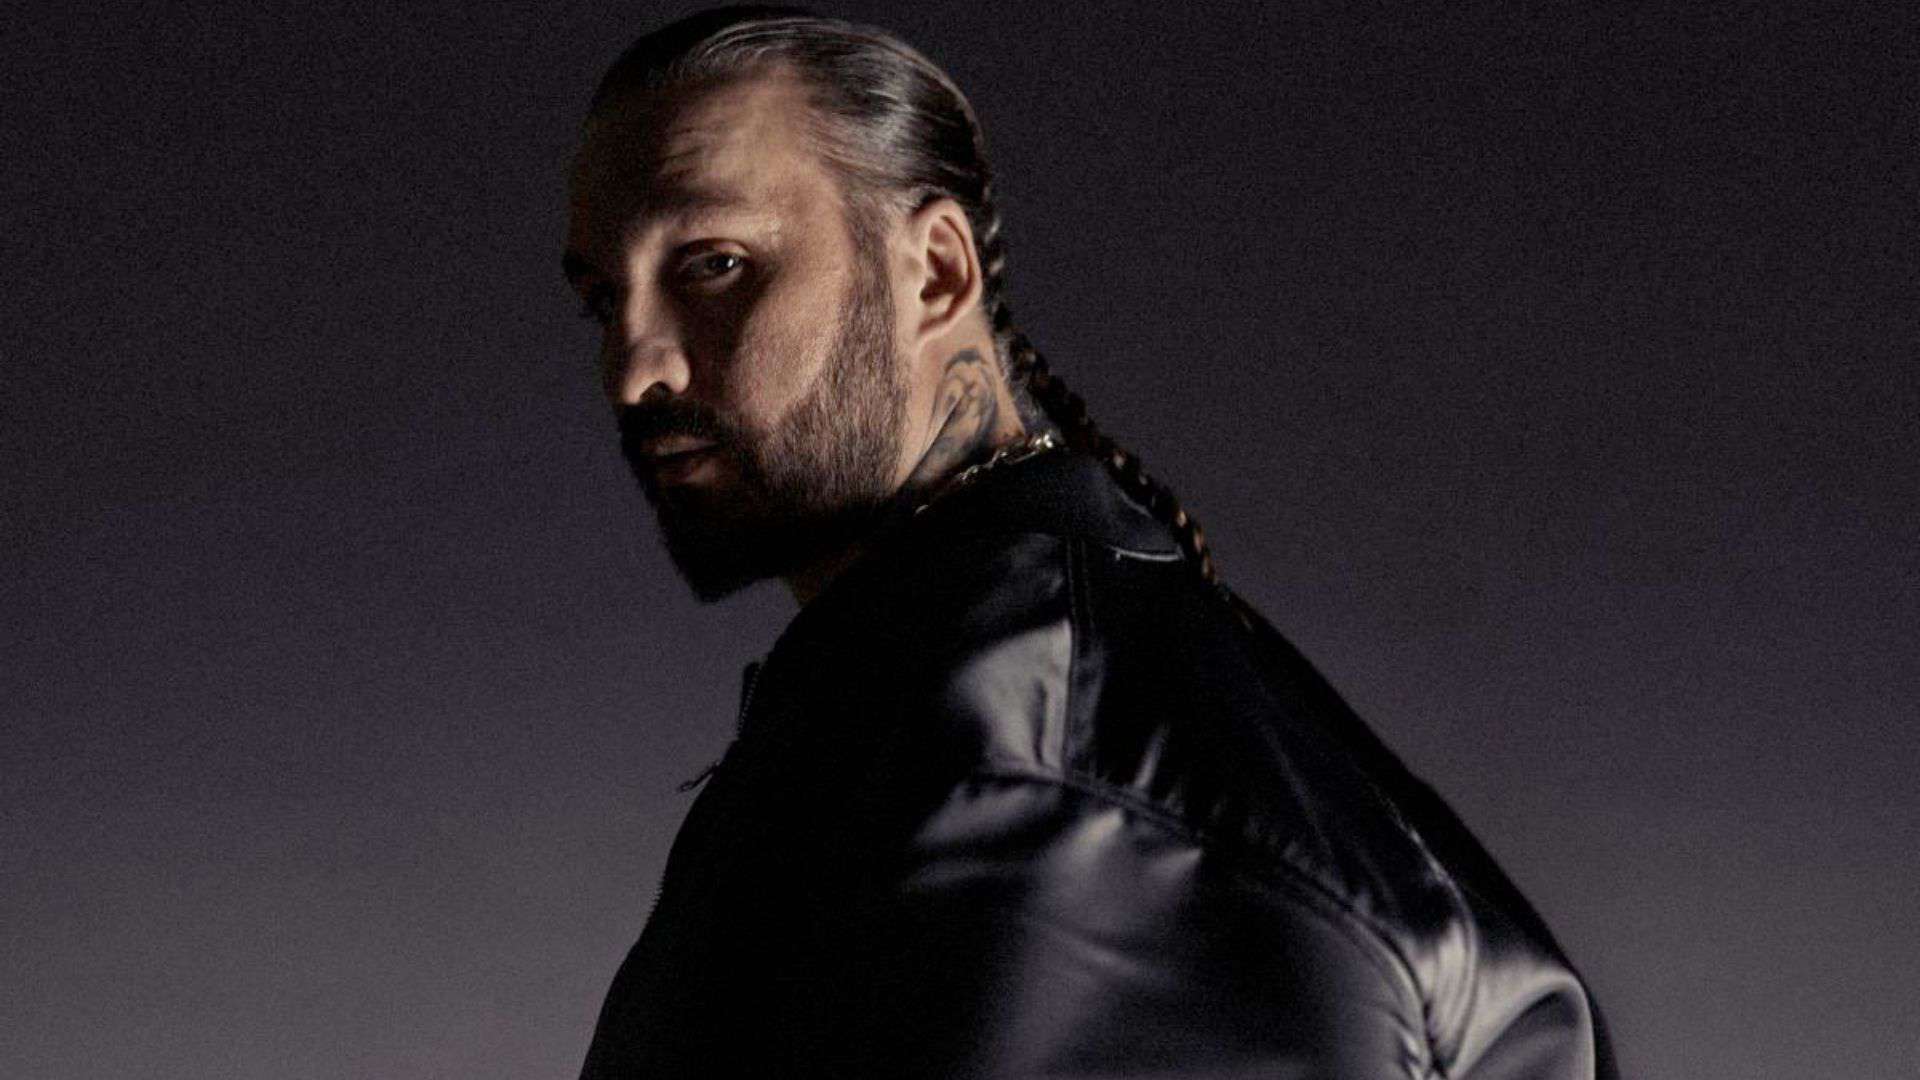 Steve Angello releases highly anticipated track ‘ME’: Listen